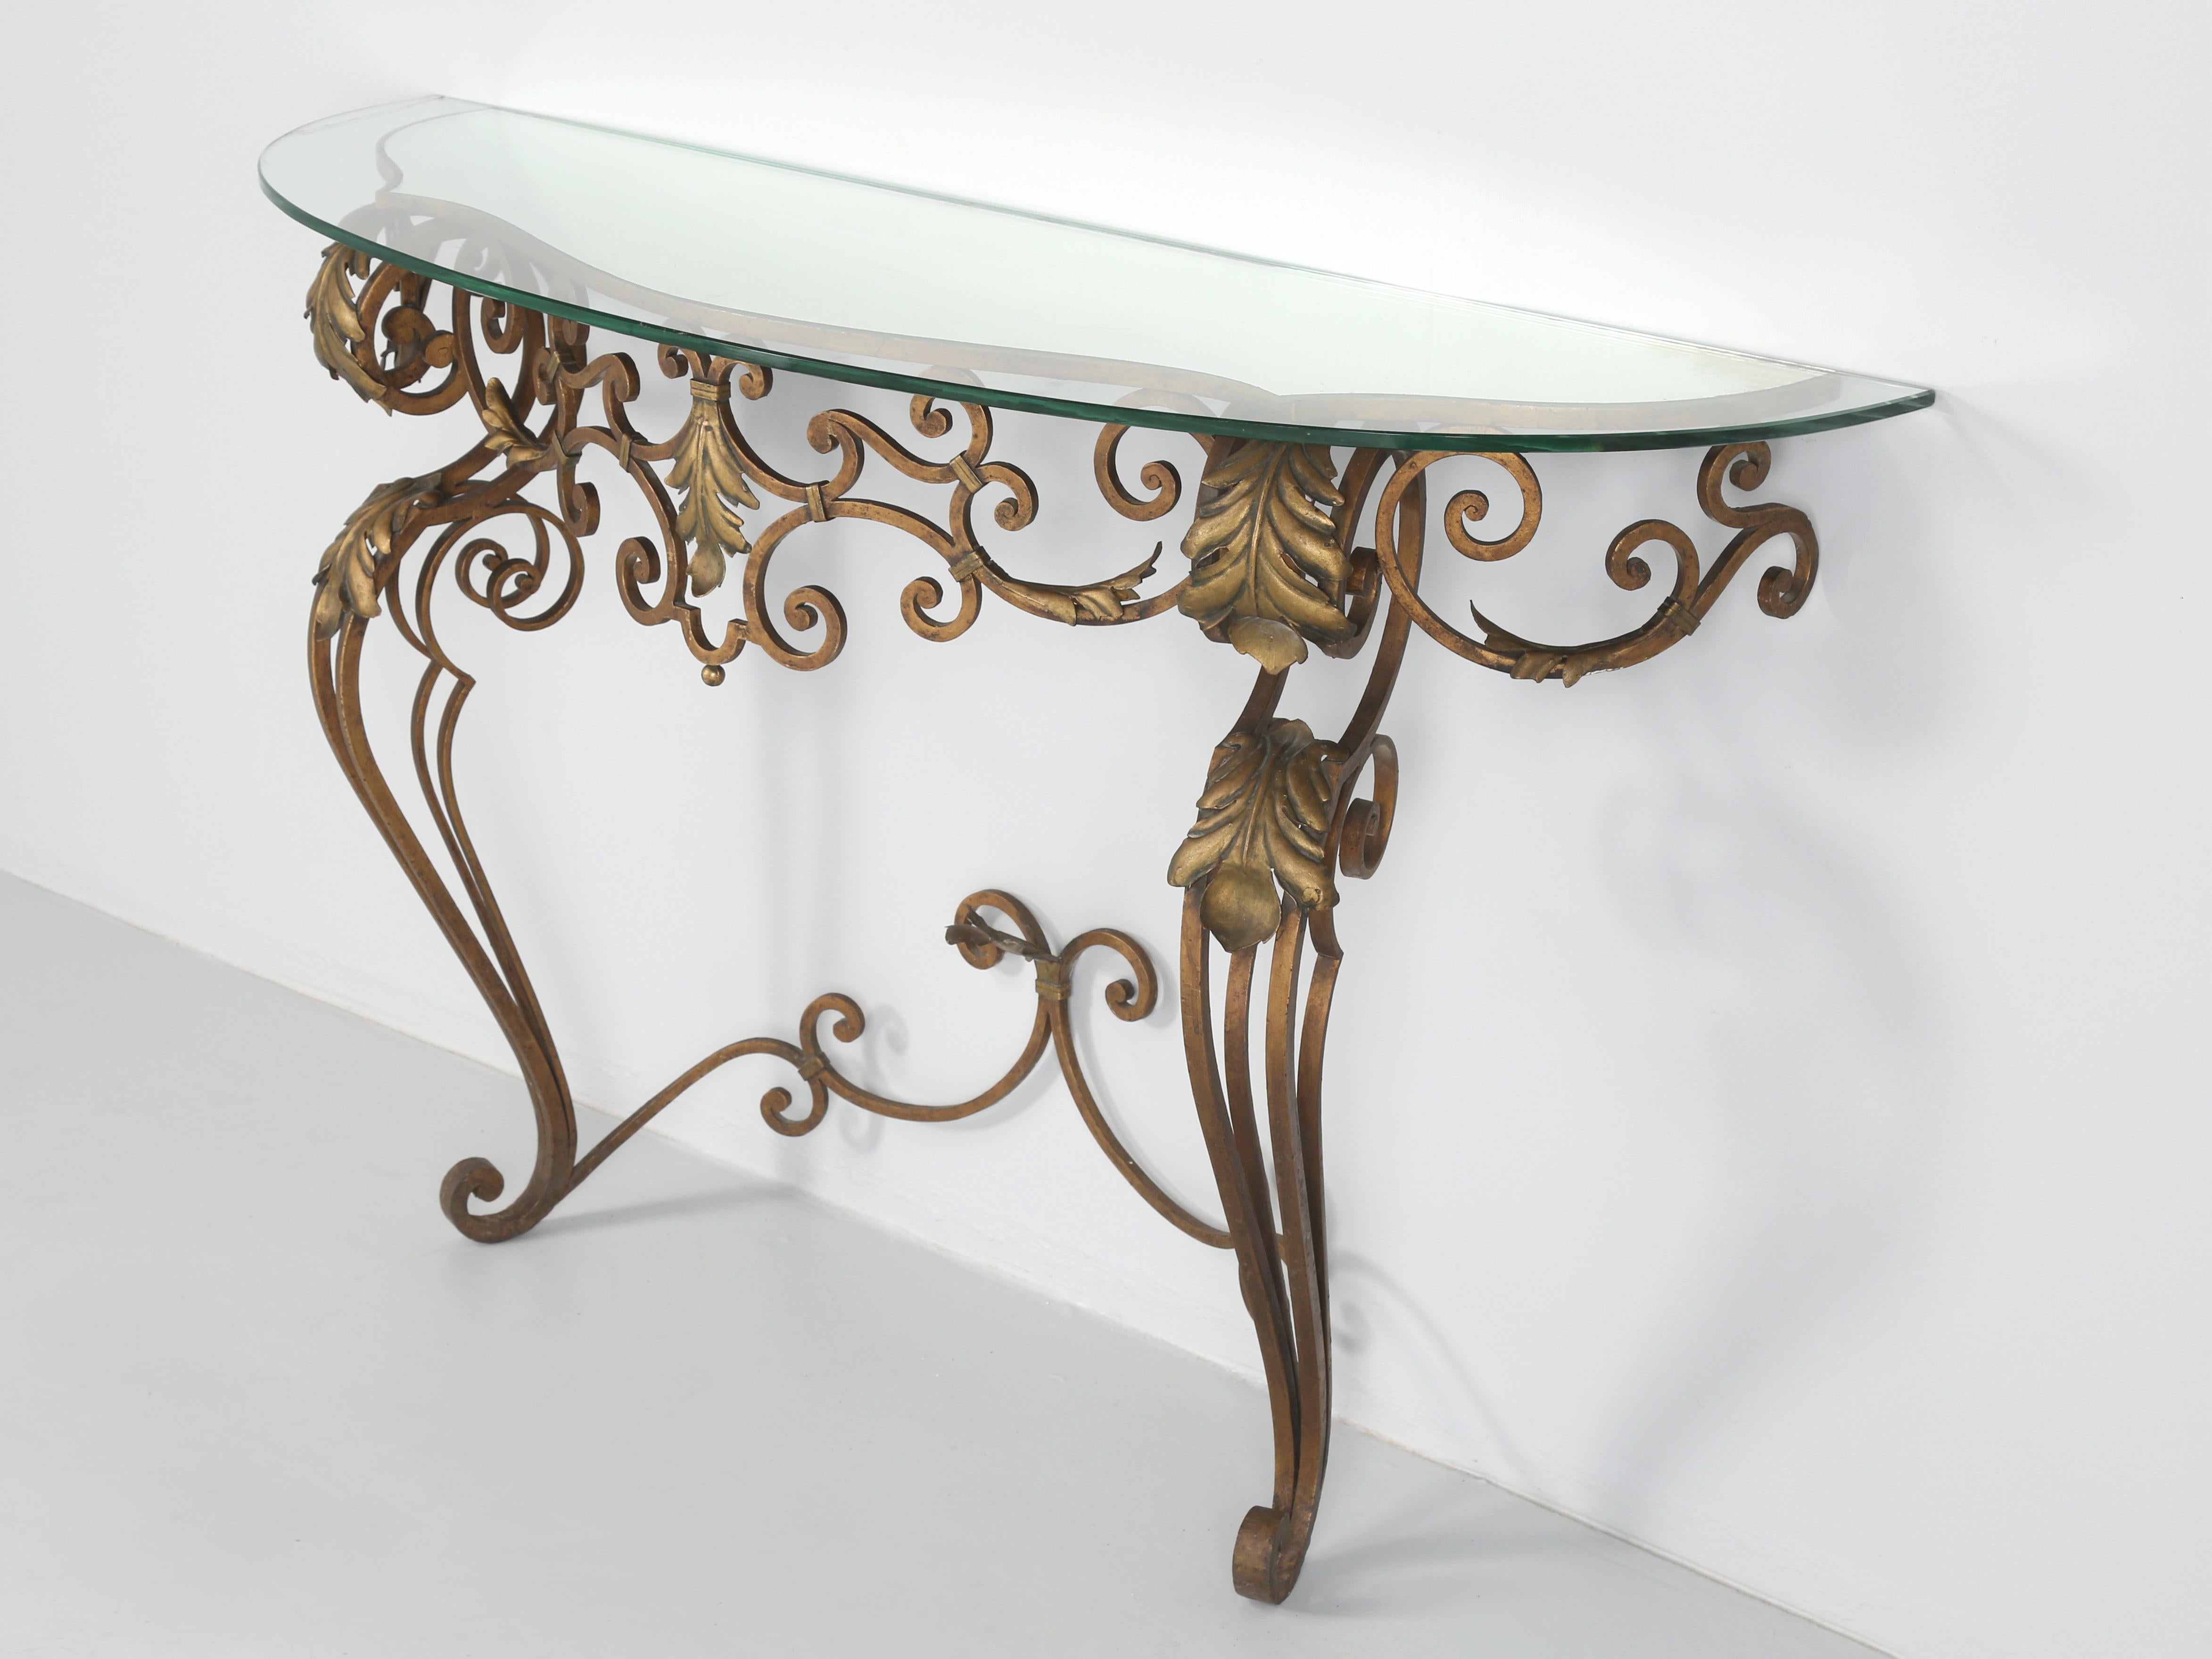 Vintage French Art Deco style wrought iron console table from the 1930’s to 1940’s. Before you read any further, this vintage French wrought iron console table will require a new top, for someone, whom we will not mention broke the glass. The